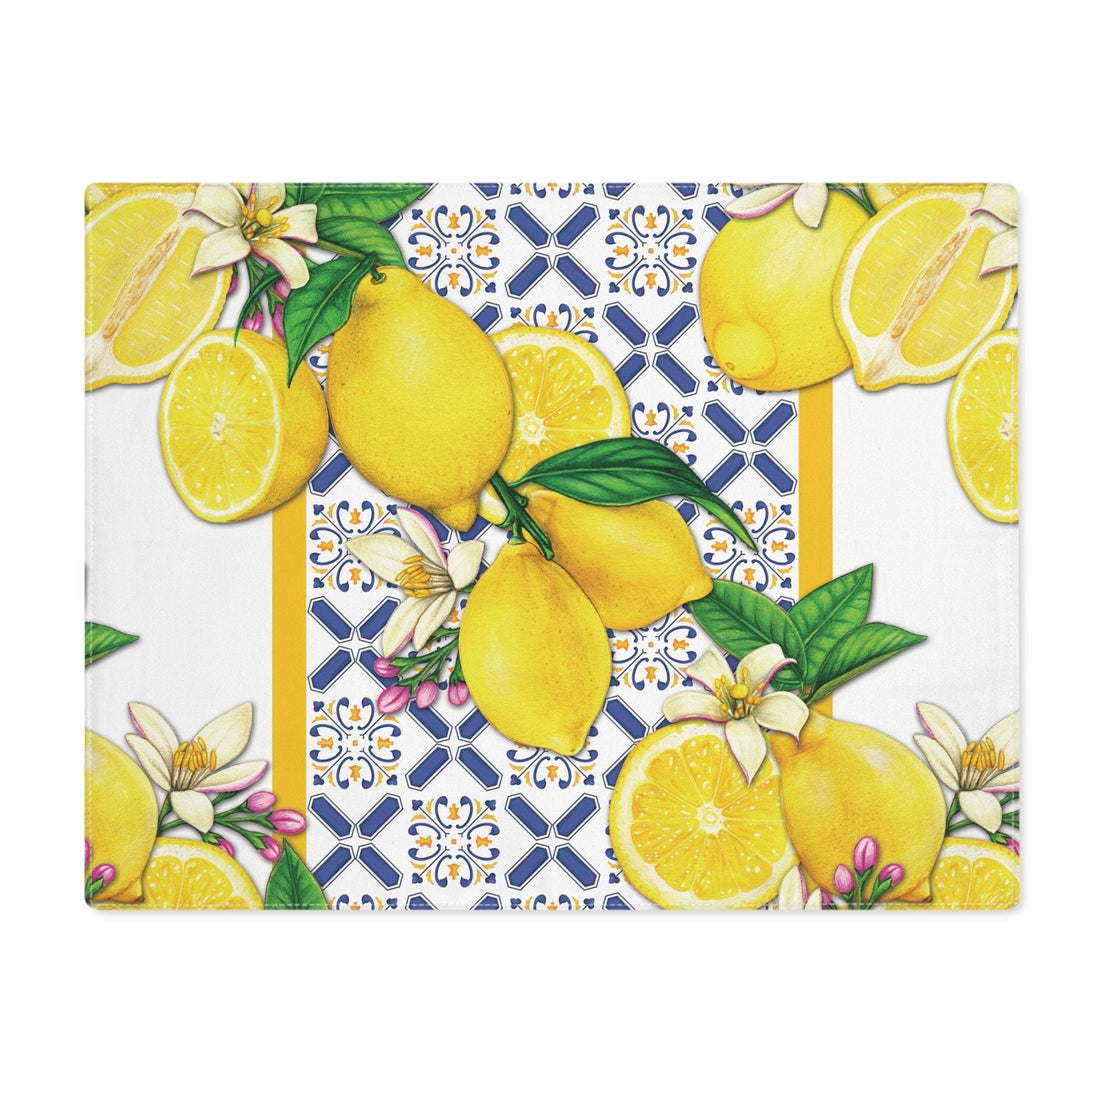 Kate McEnroe New York Lemon and Tiles Cobalt Blue &amp; Yellow Woven Placemats, Mediterranean Floral Dining Table Linens, Fall Home Decor, Hostess Gift, Table SettingPlacematsDPM - LEM - TLS - 3